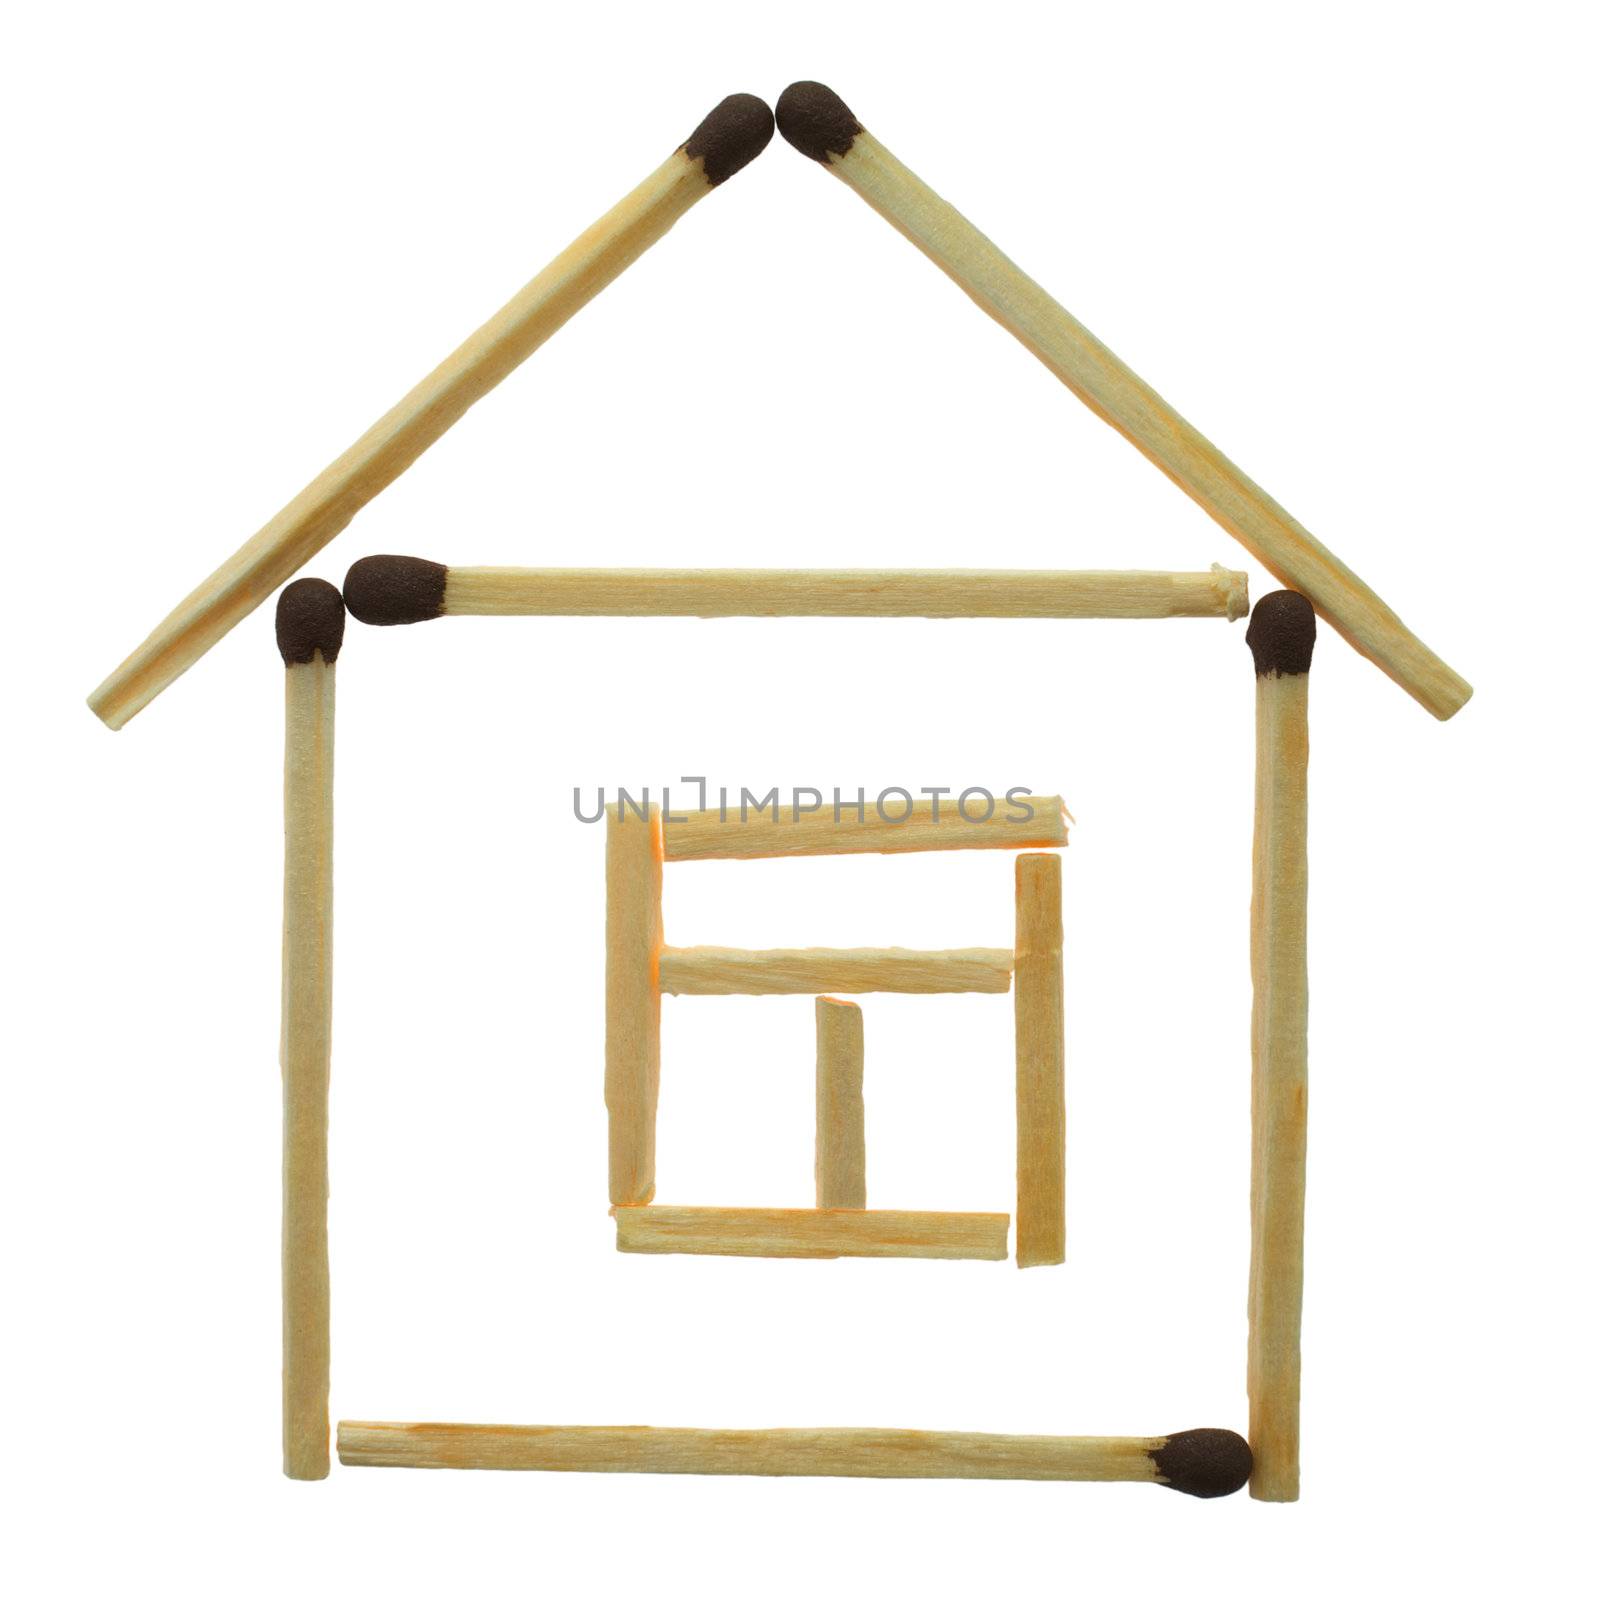 Small house from matches on a white background